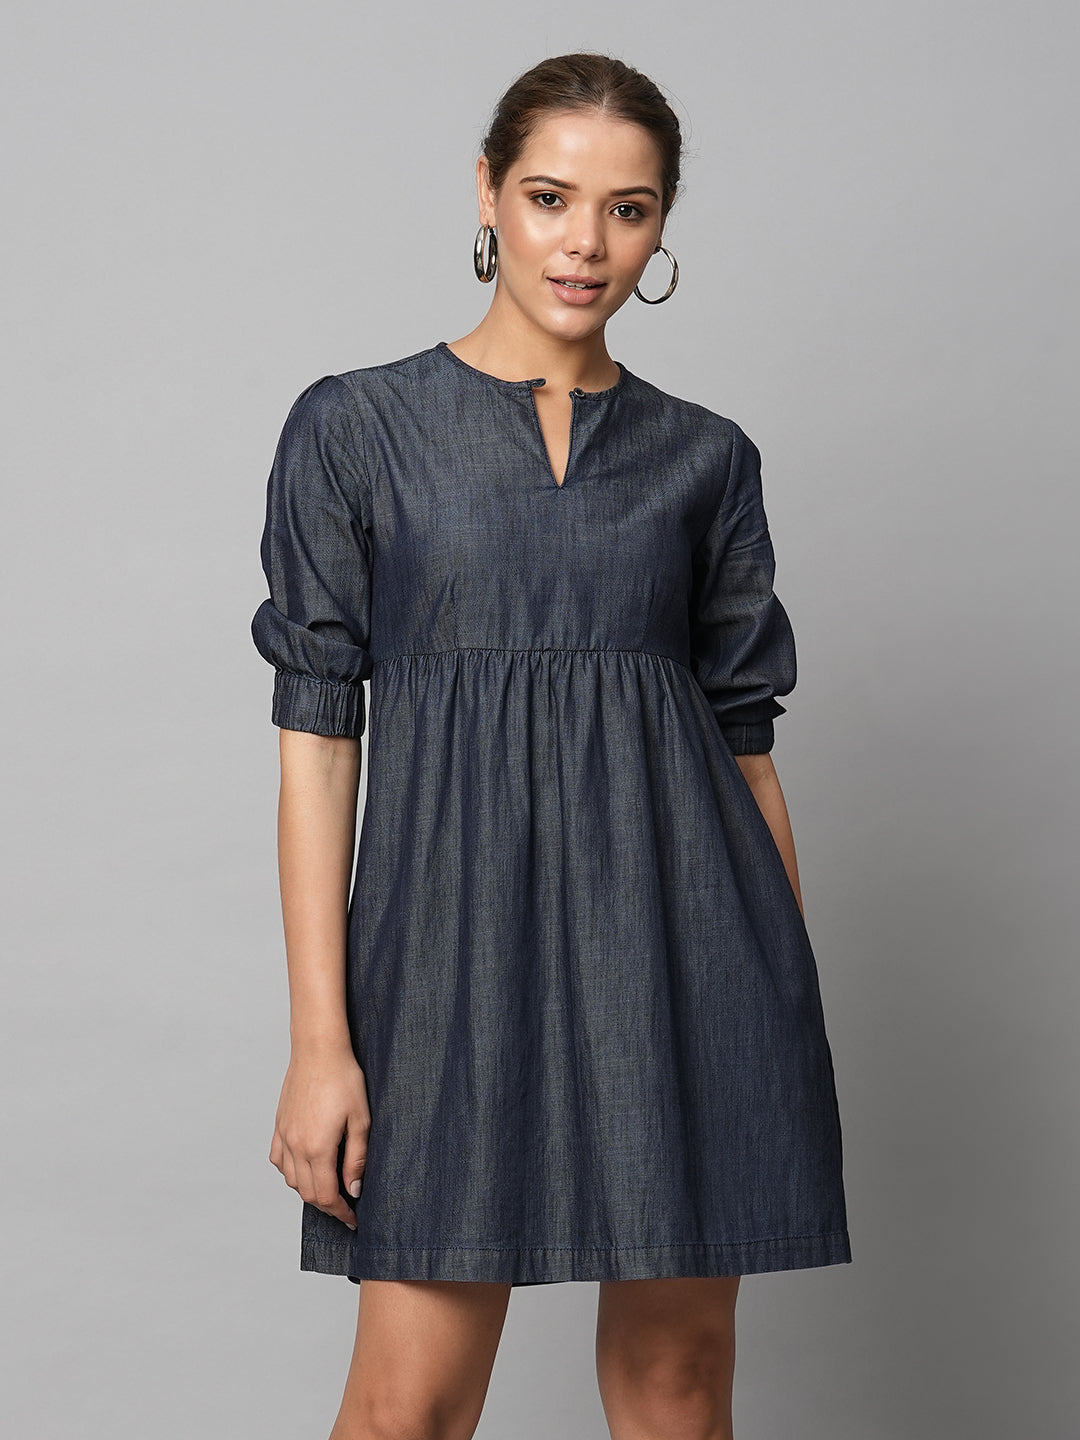 Shop denim dresses for a chic and trendy style. – Chemistry